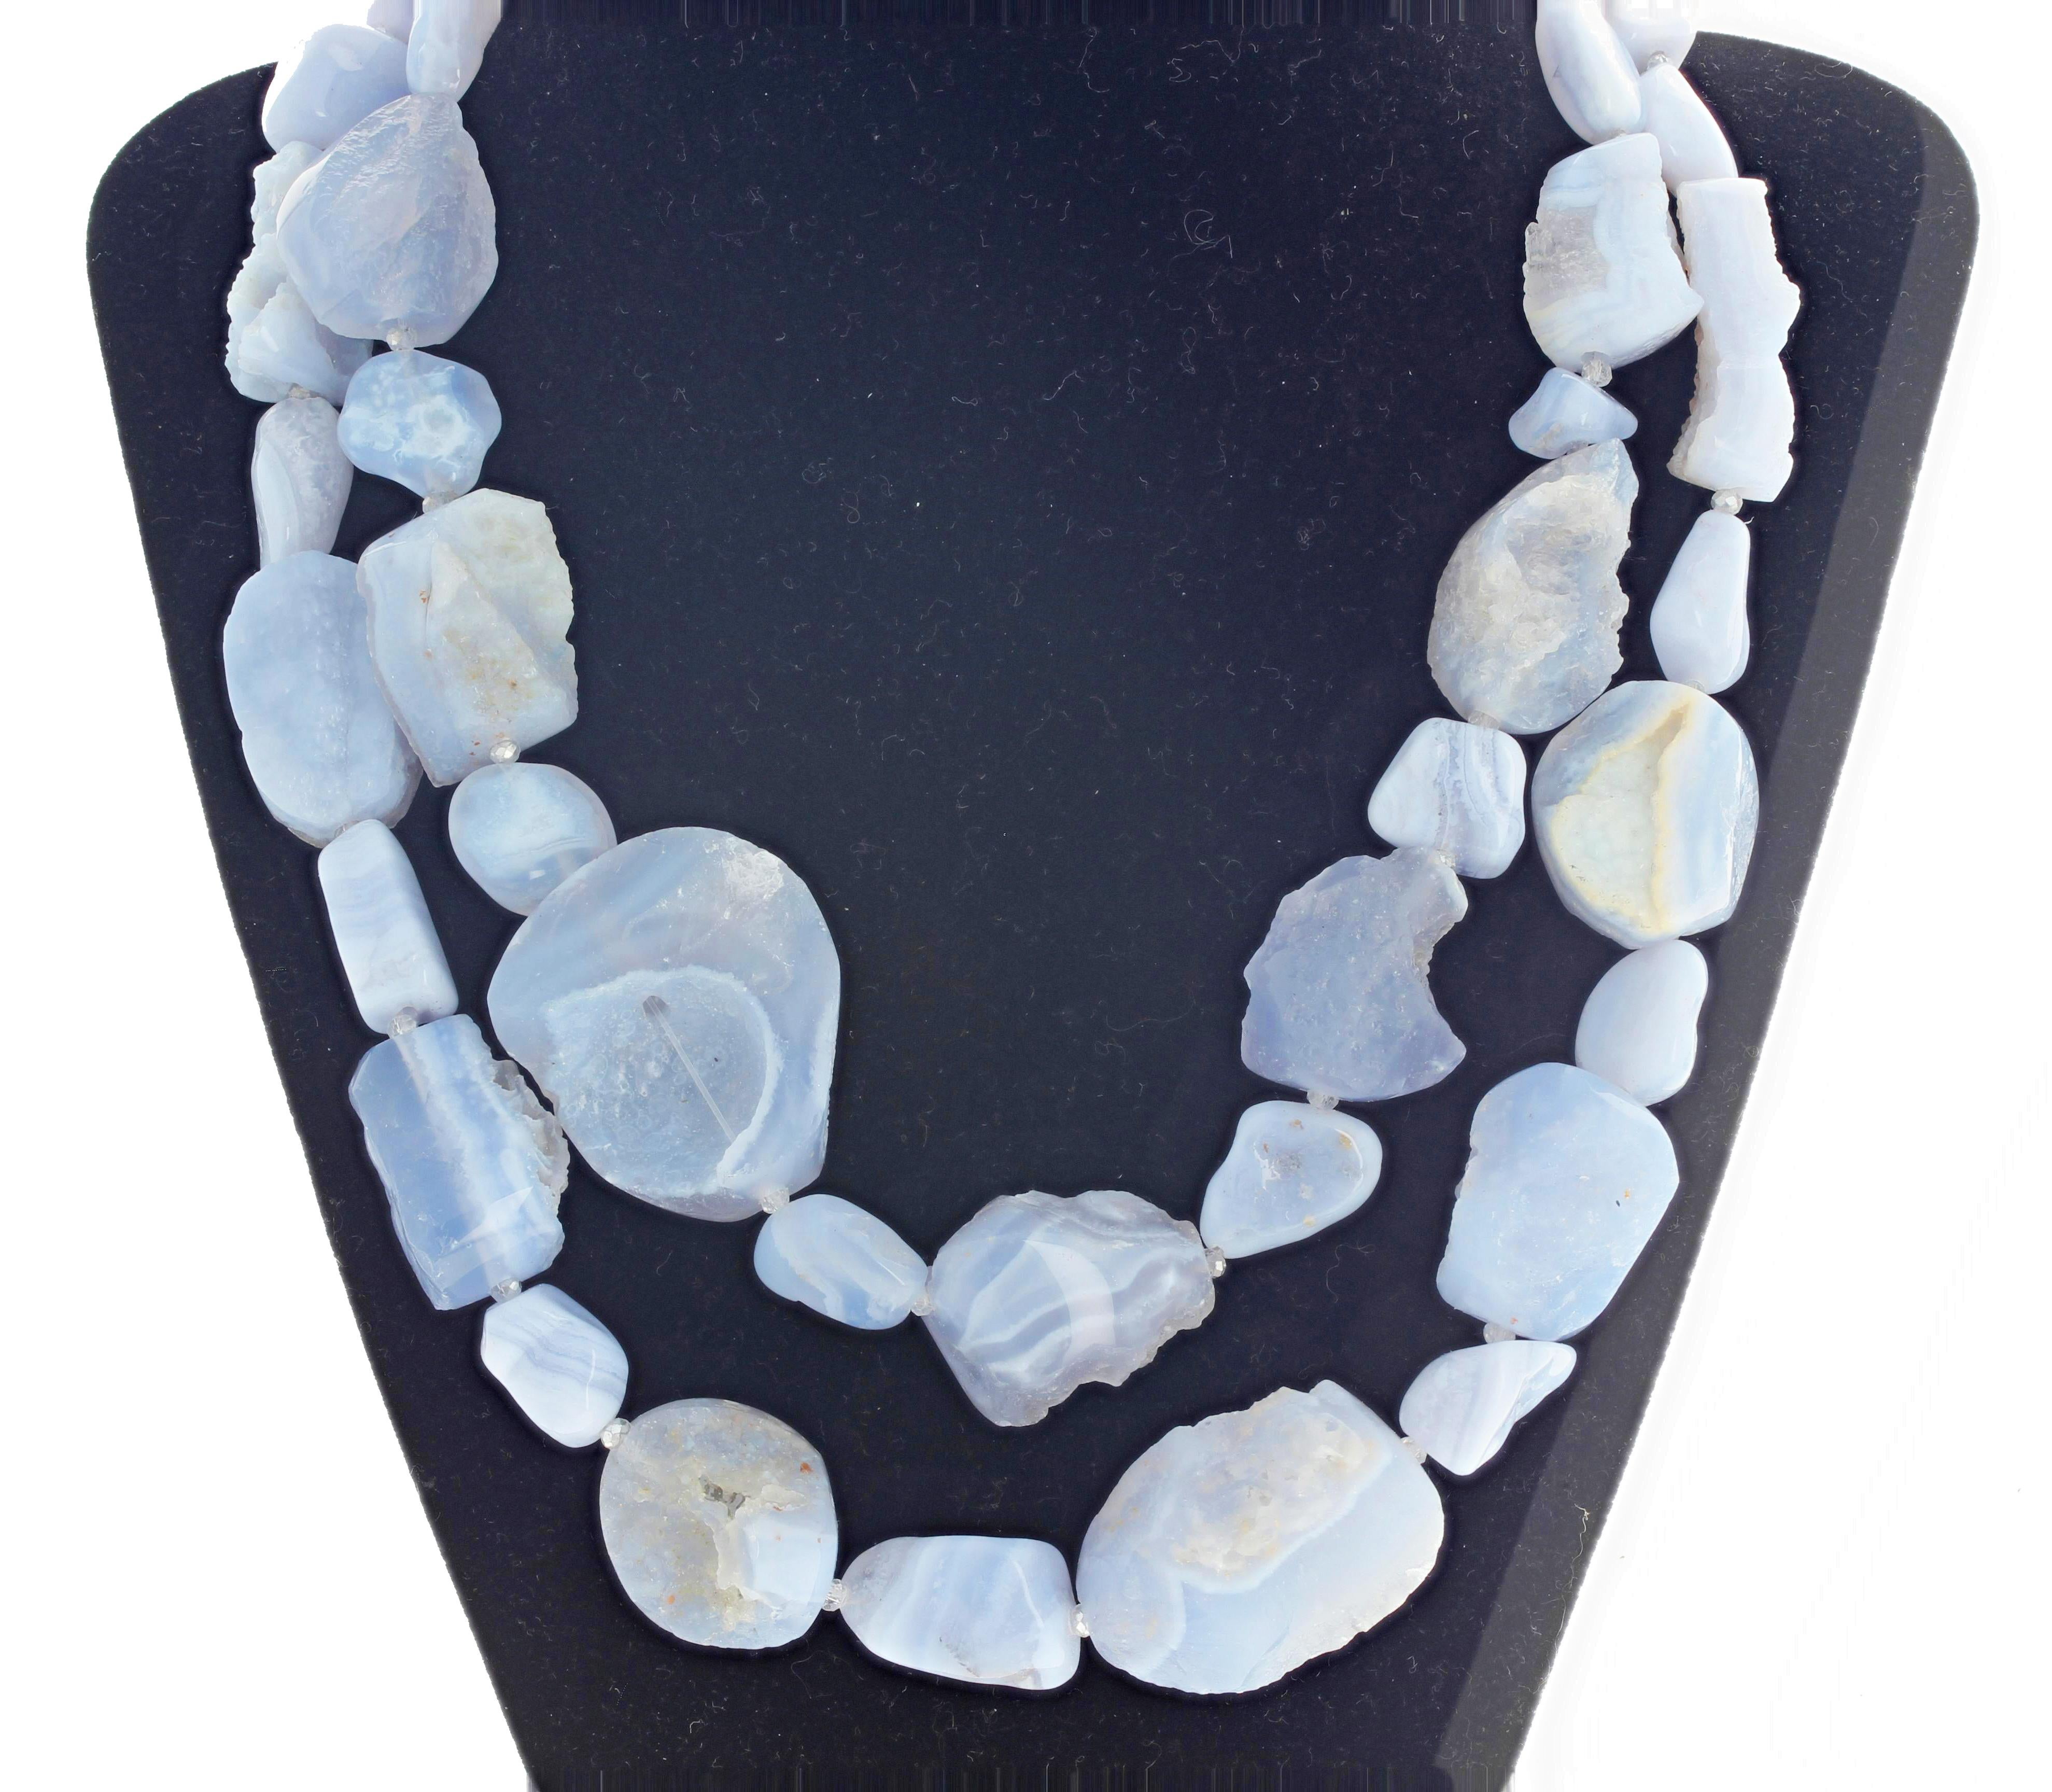 Beautiful soft blue natural real stunning Chalcedony polished rocks compose this 17 inch long double strand necklace accented with sparkling little crystals.  Largest stone is 35mm x 30 mm and the clasp on this fascinating unusual gemstone necklace